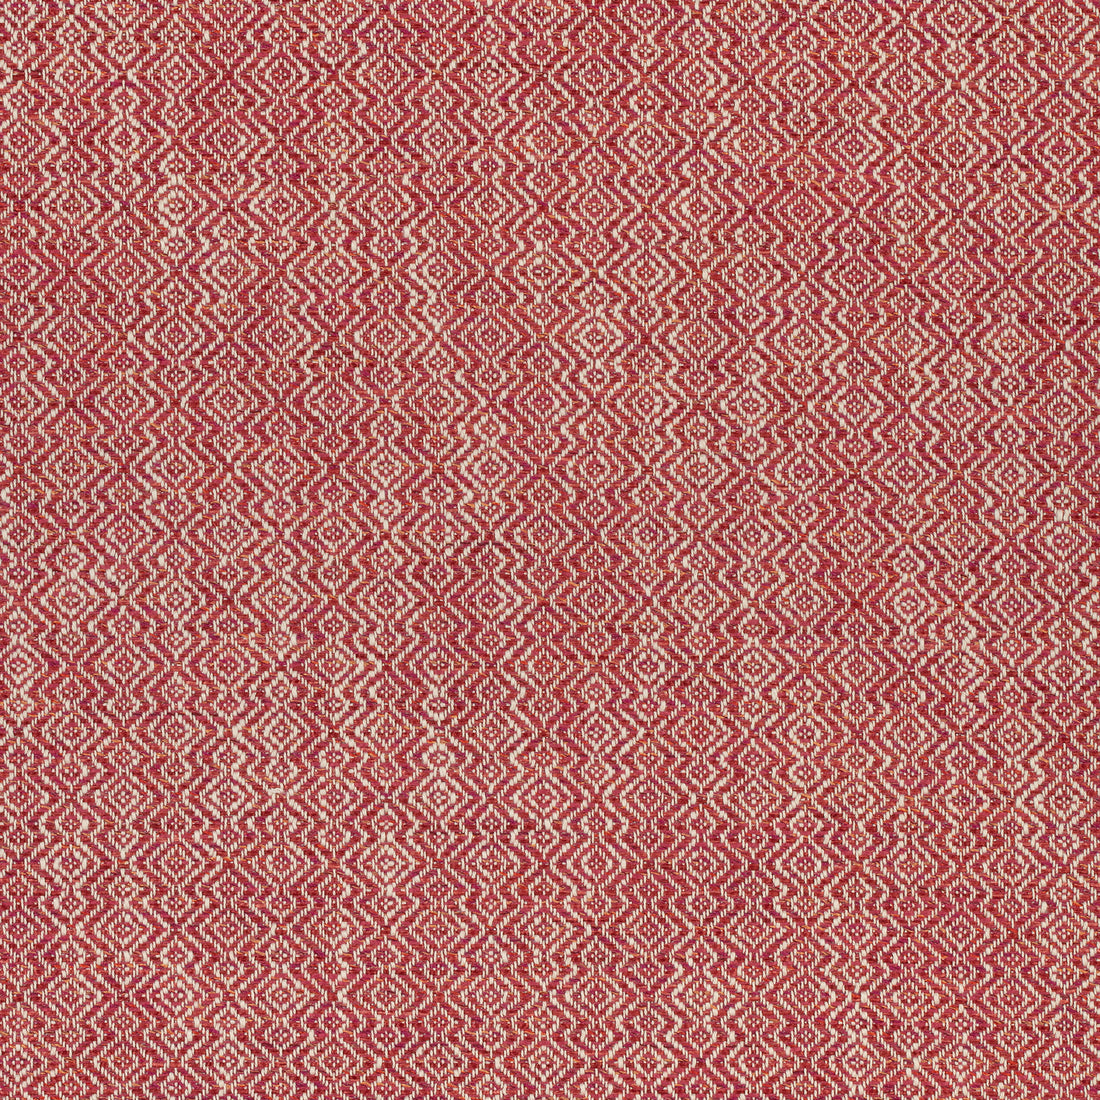 Kingsley fabric in claret color - pattern number W74067 - by Thibaut in the Cadence collection